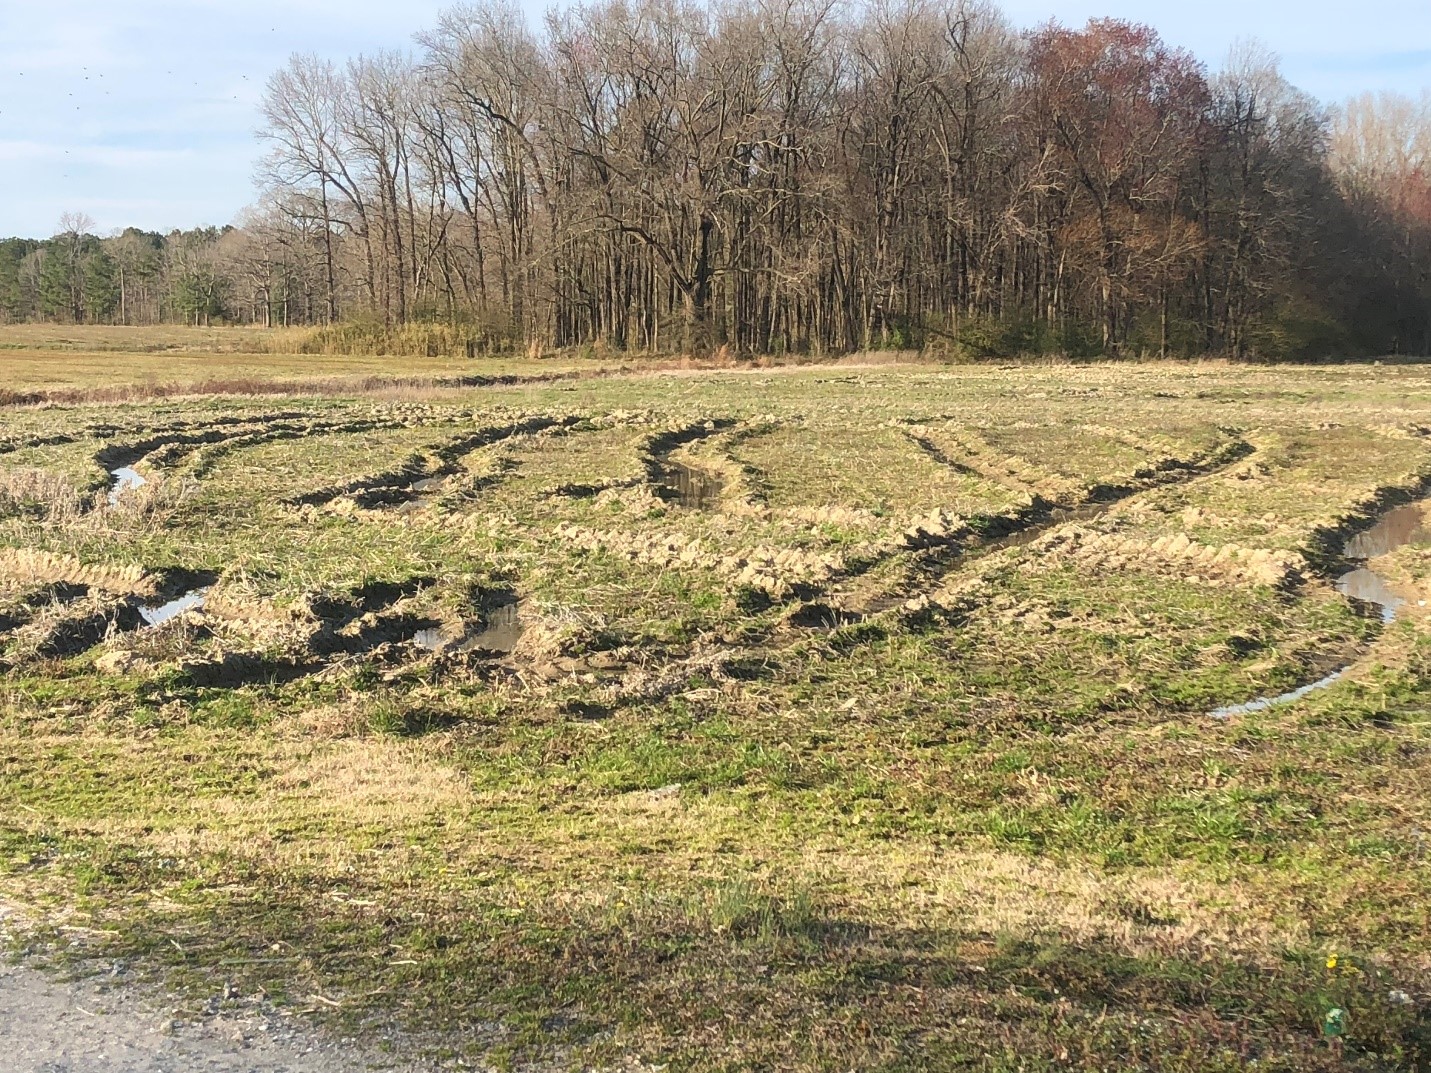 Ruts in a field caused by a grain combine due to a wet 2018 harvest season.